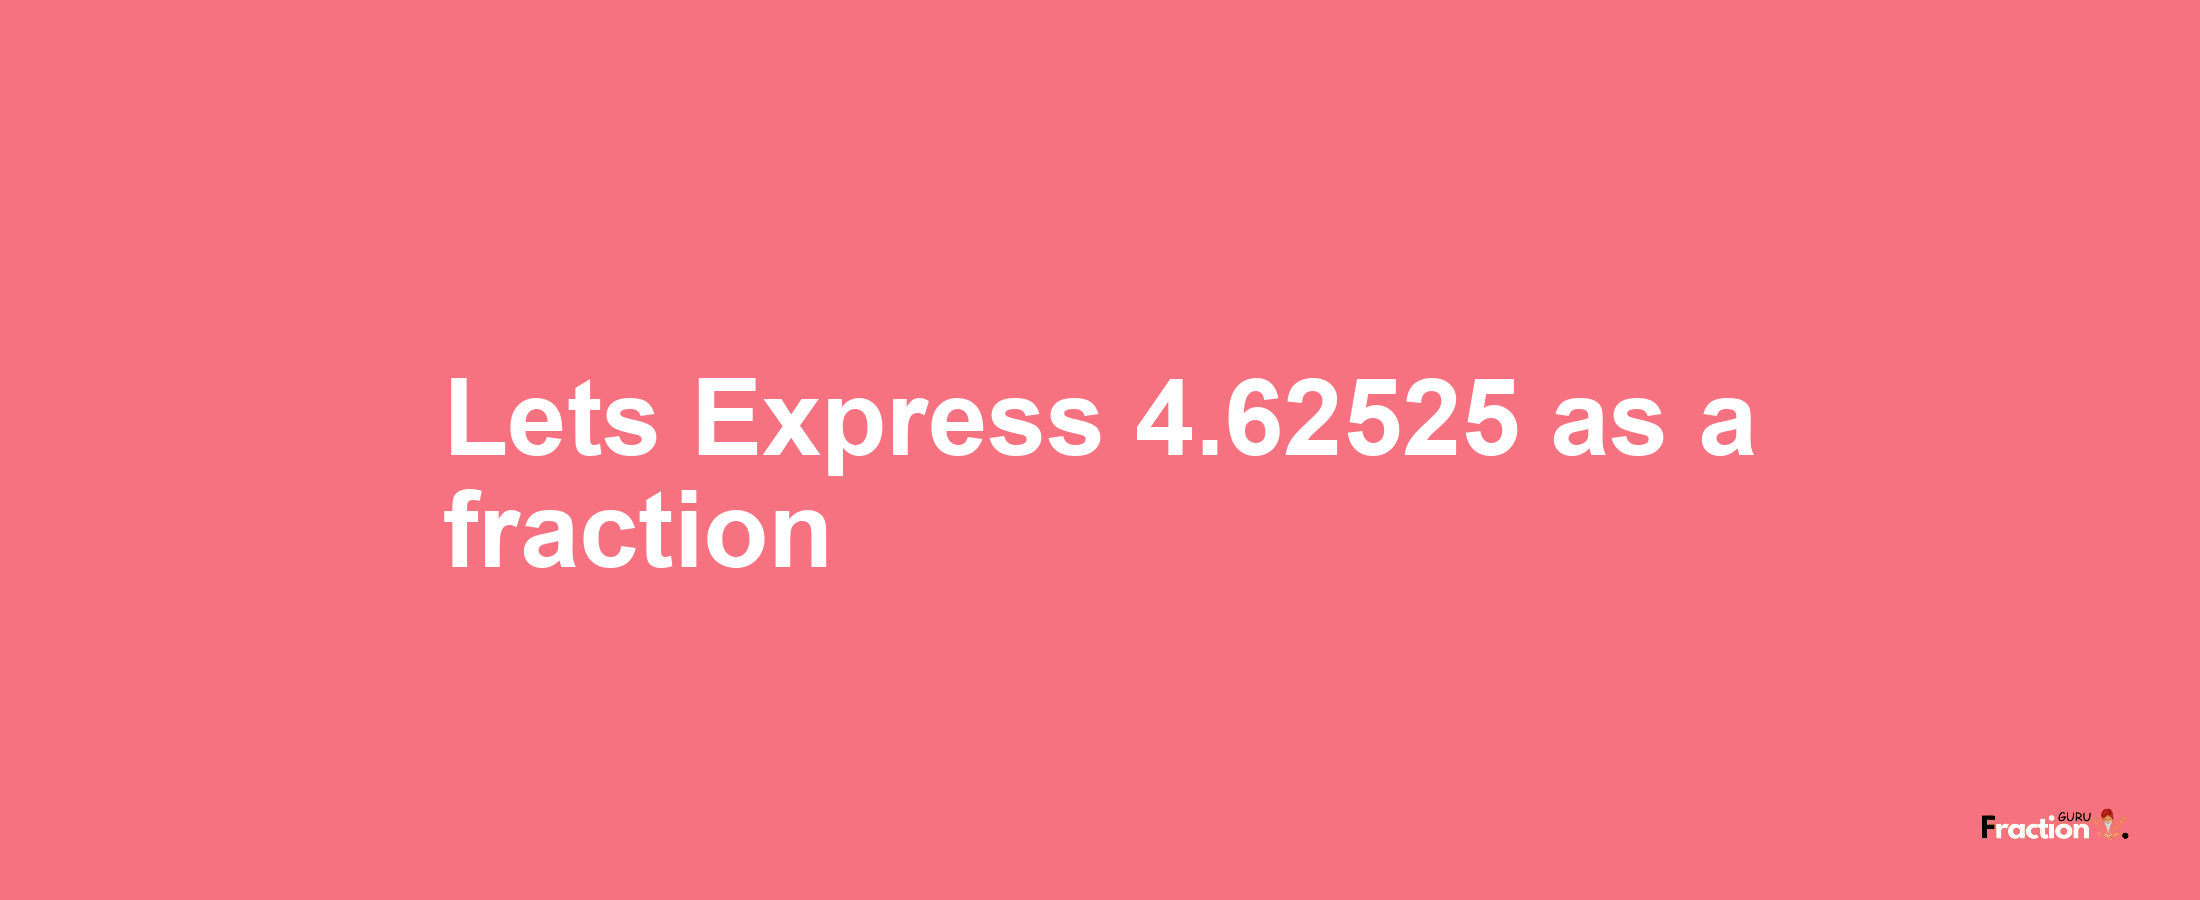 Lets Express 4.62525 as afraction